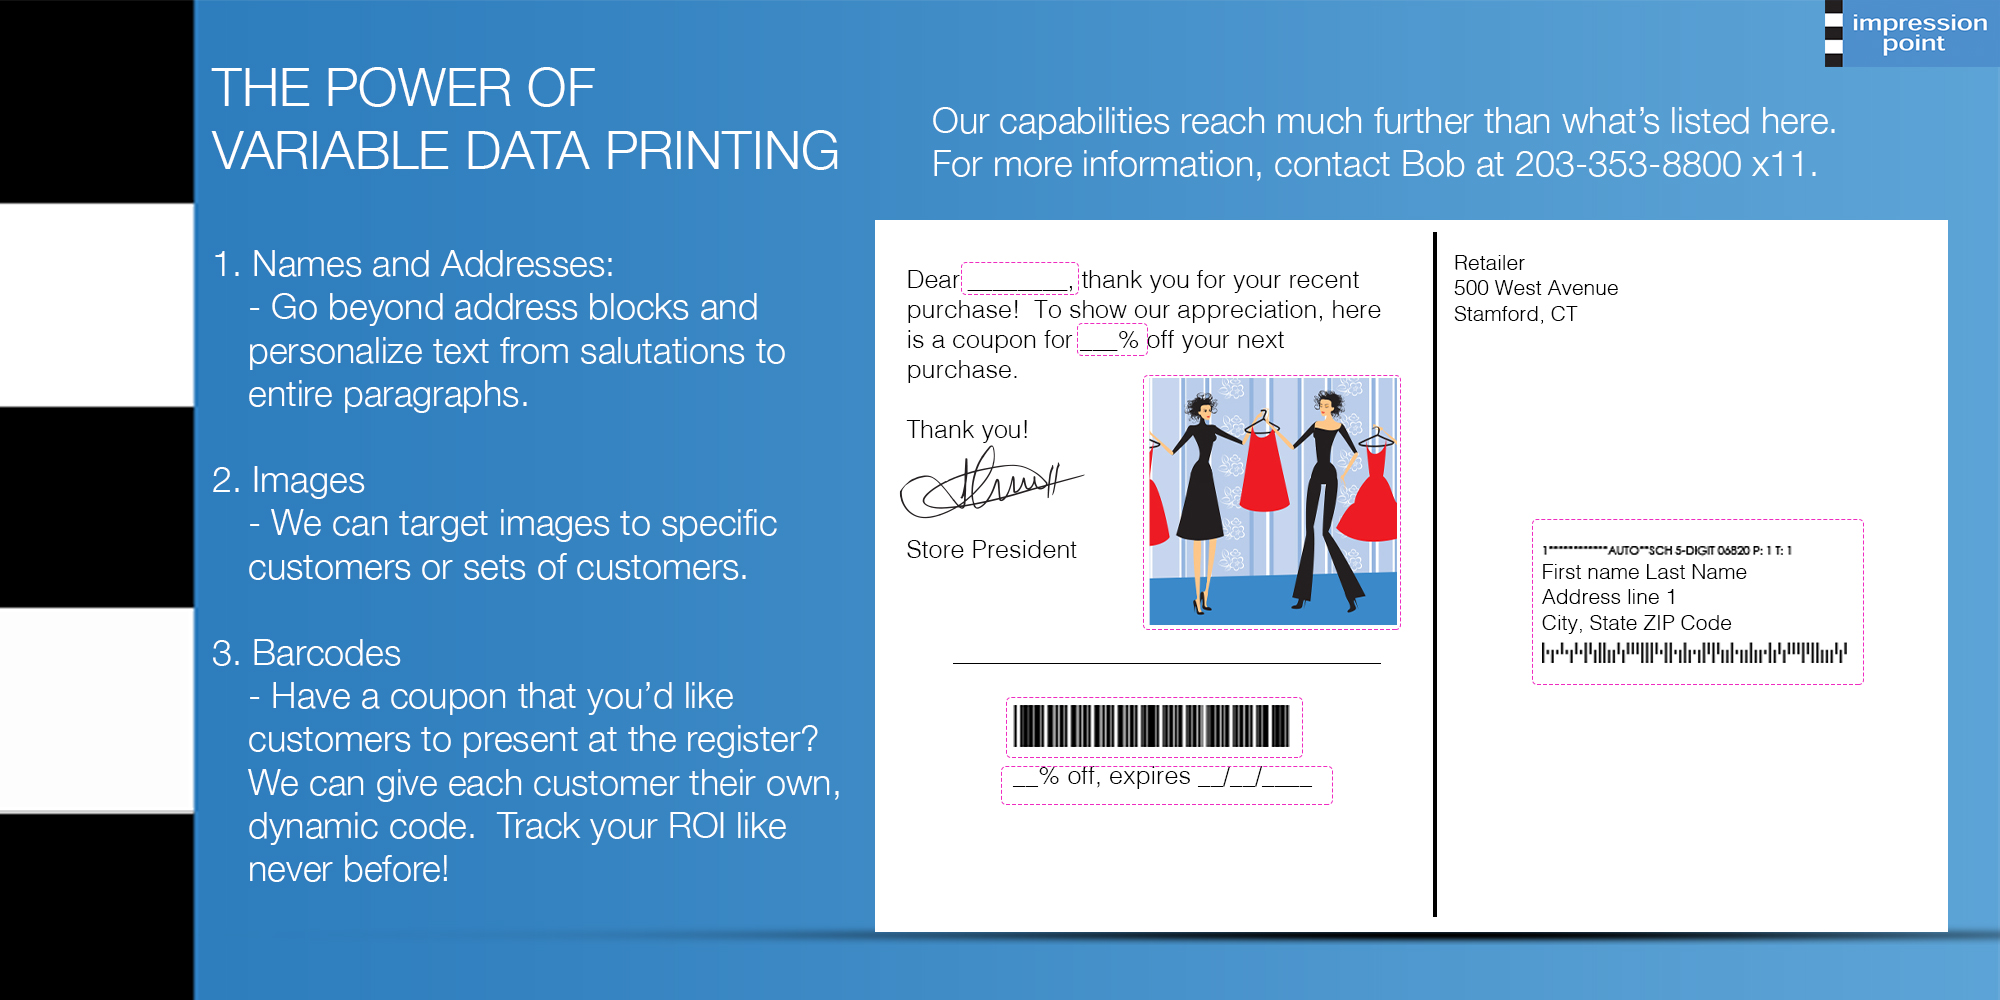 Variable Data Printing and Direct Mail Services from Impression Point